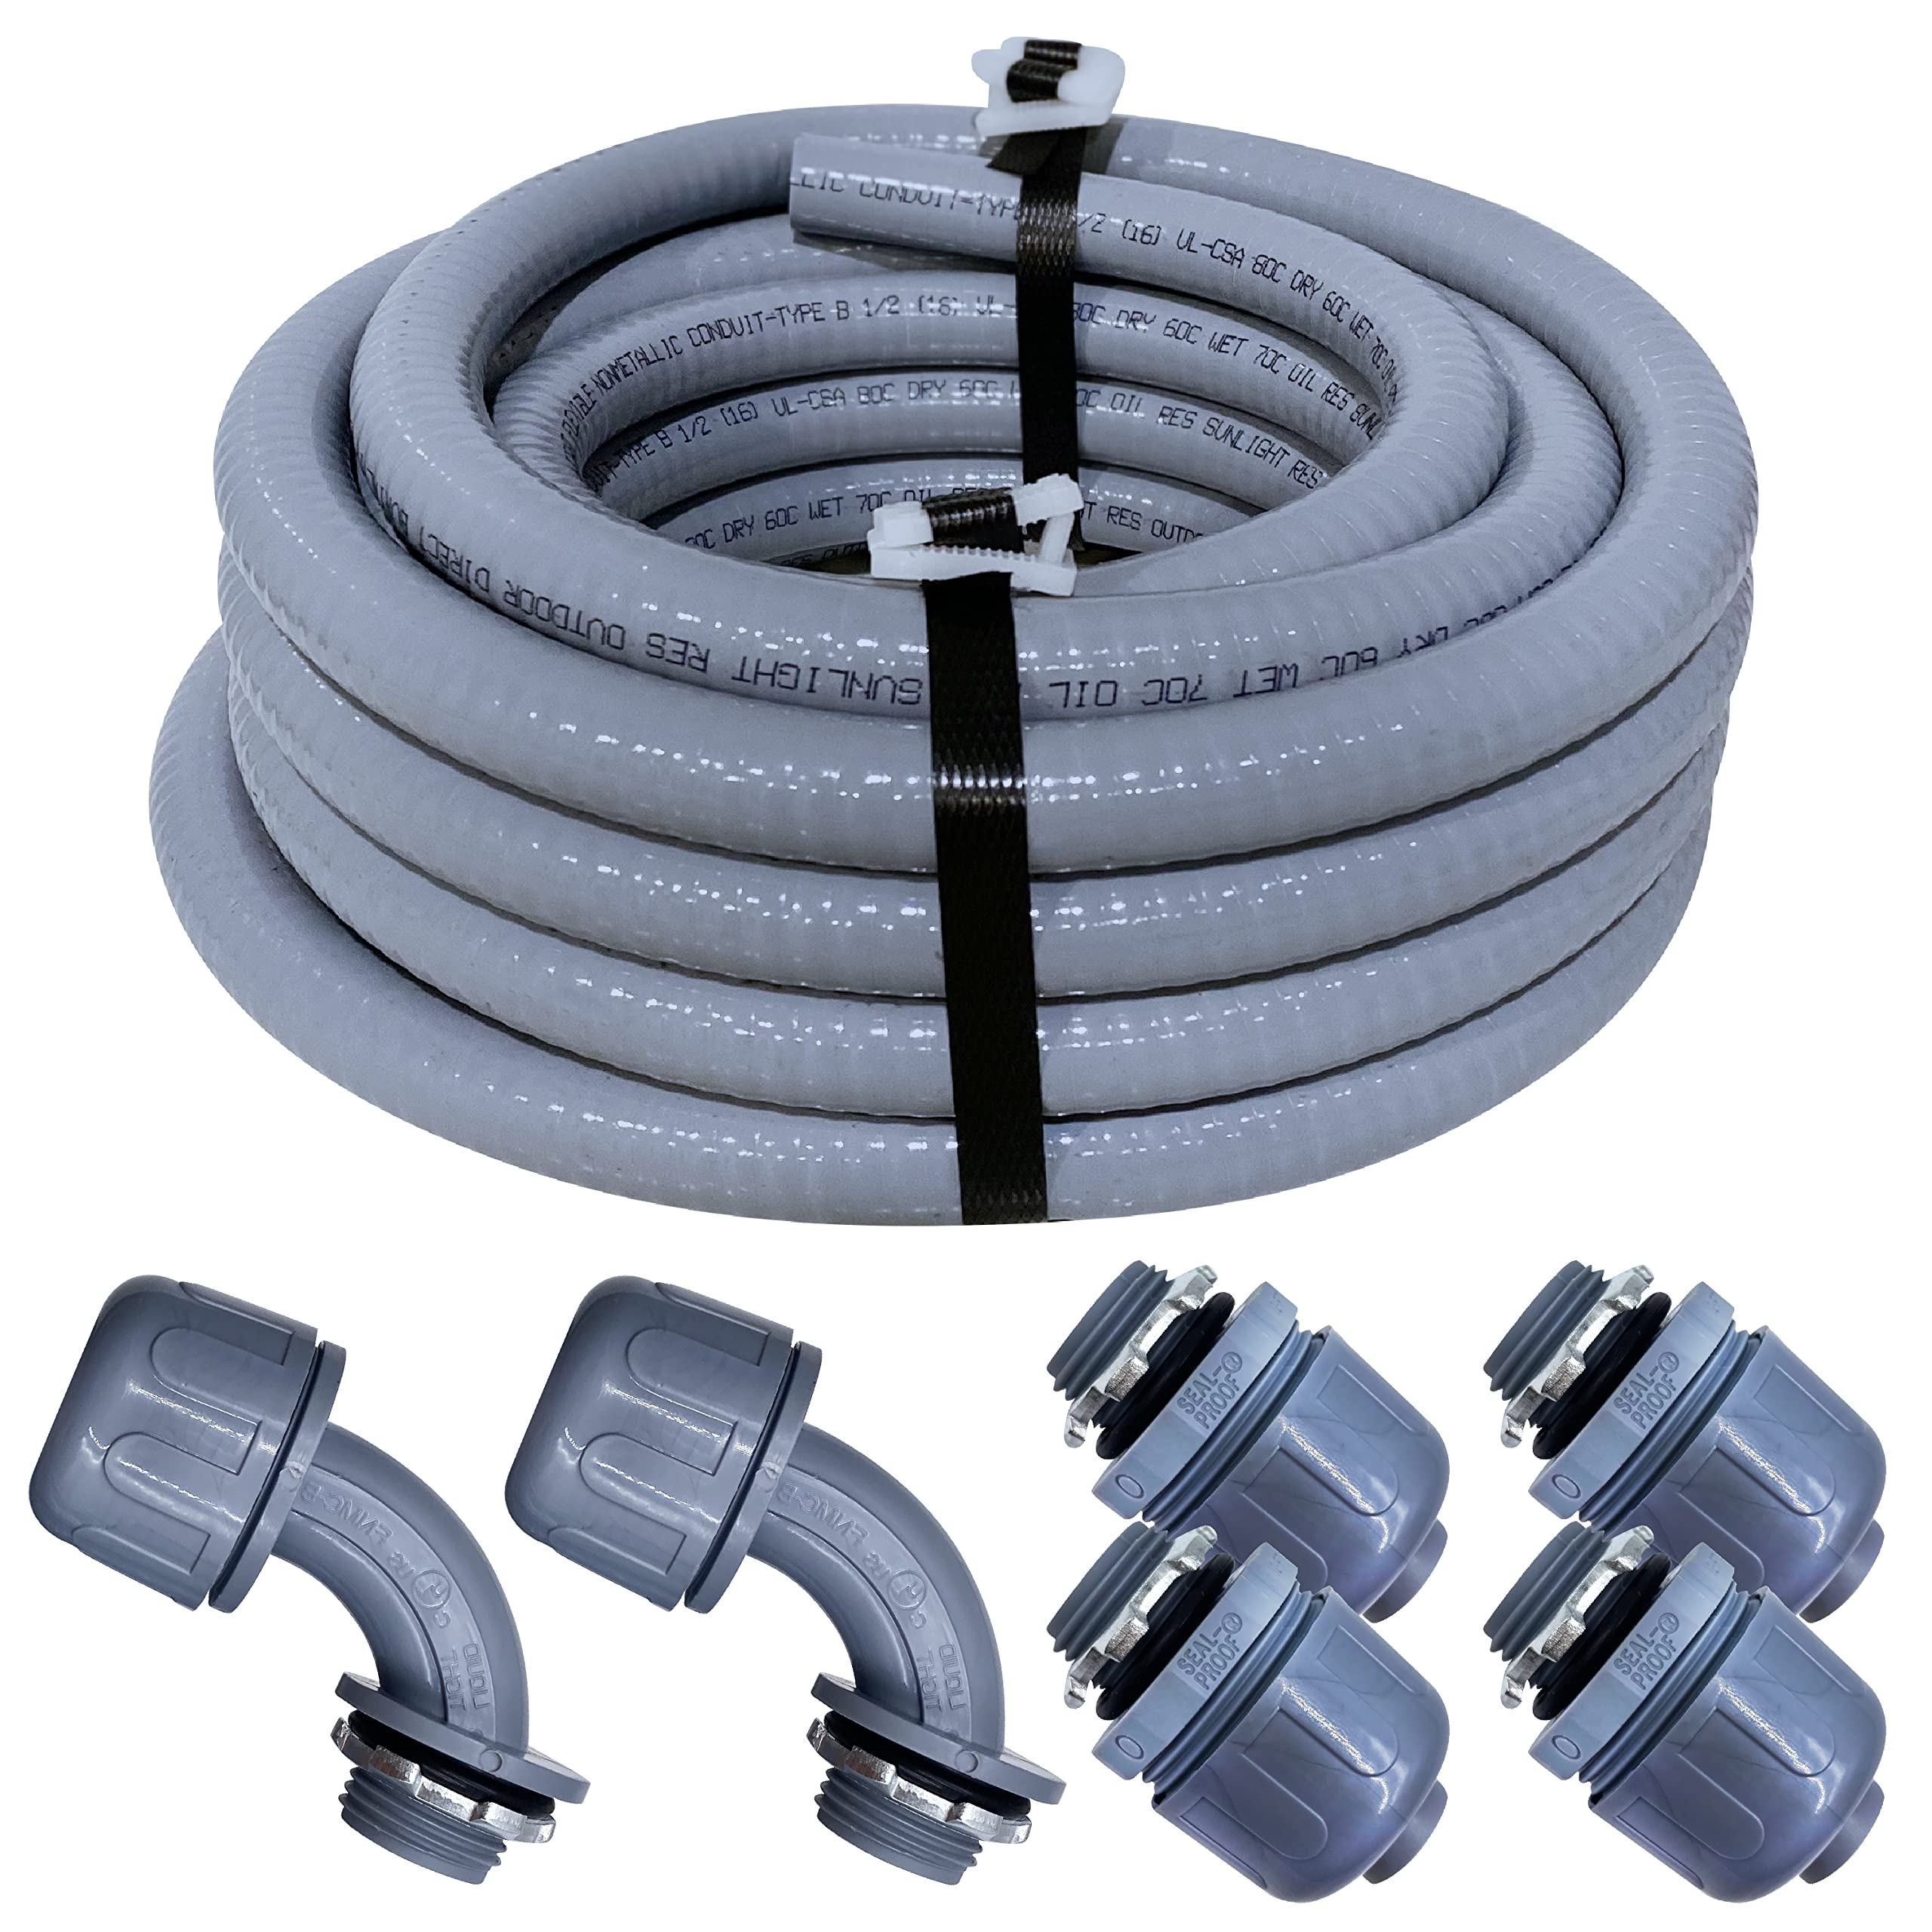 Book Cover Sealproof 1/2-Inch Non-Metallic Liquid-Tight Conduit and Connector Kit, 25 Foot Made in USA Flexible Electrical Conduit Type B with 4 Straight and 2 90-Degree Conduit Connector Fittings, 1/2